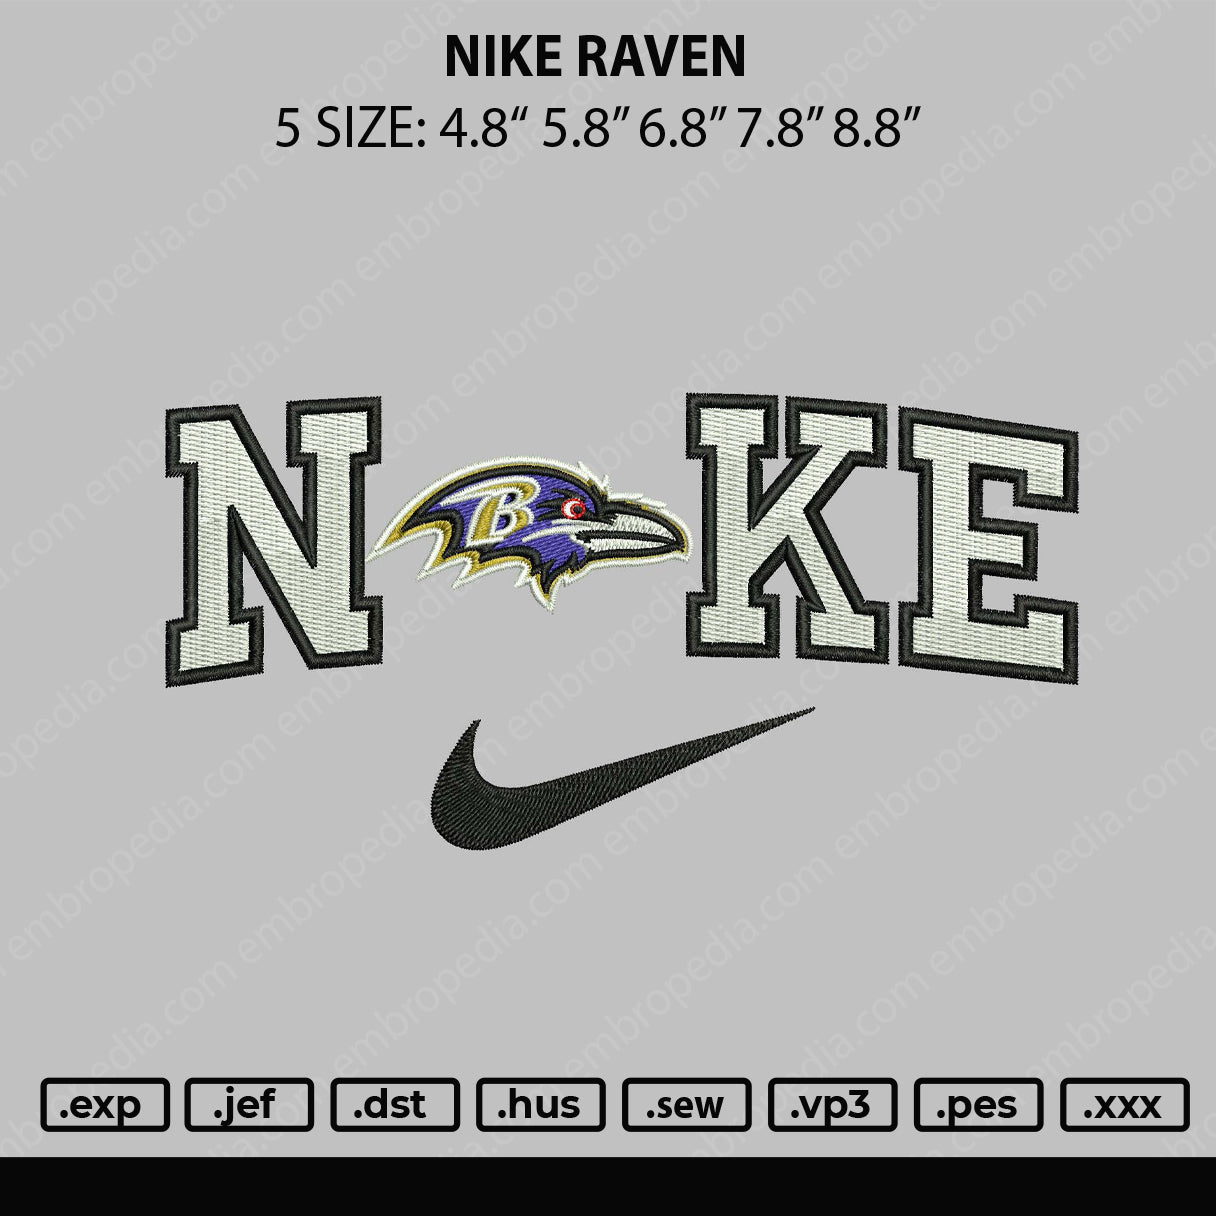 Nike Raven Embroidery File 5 sizes